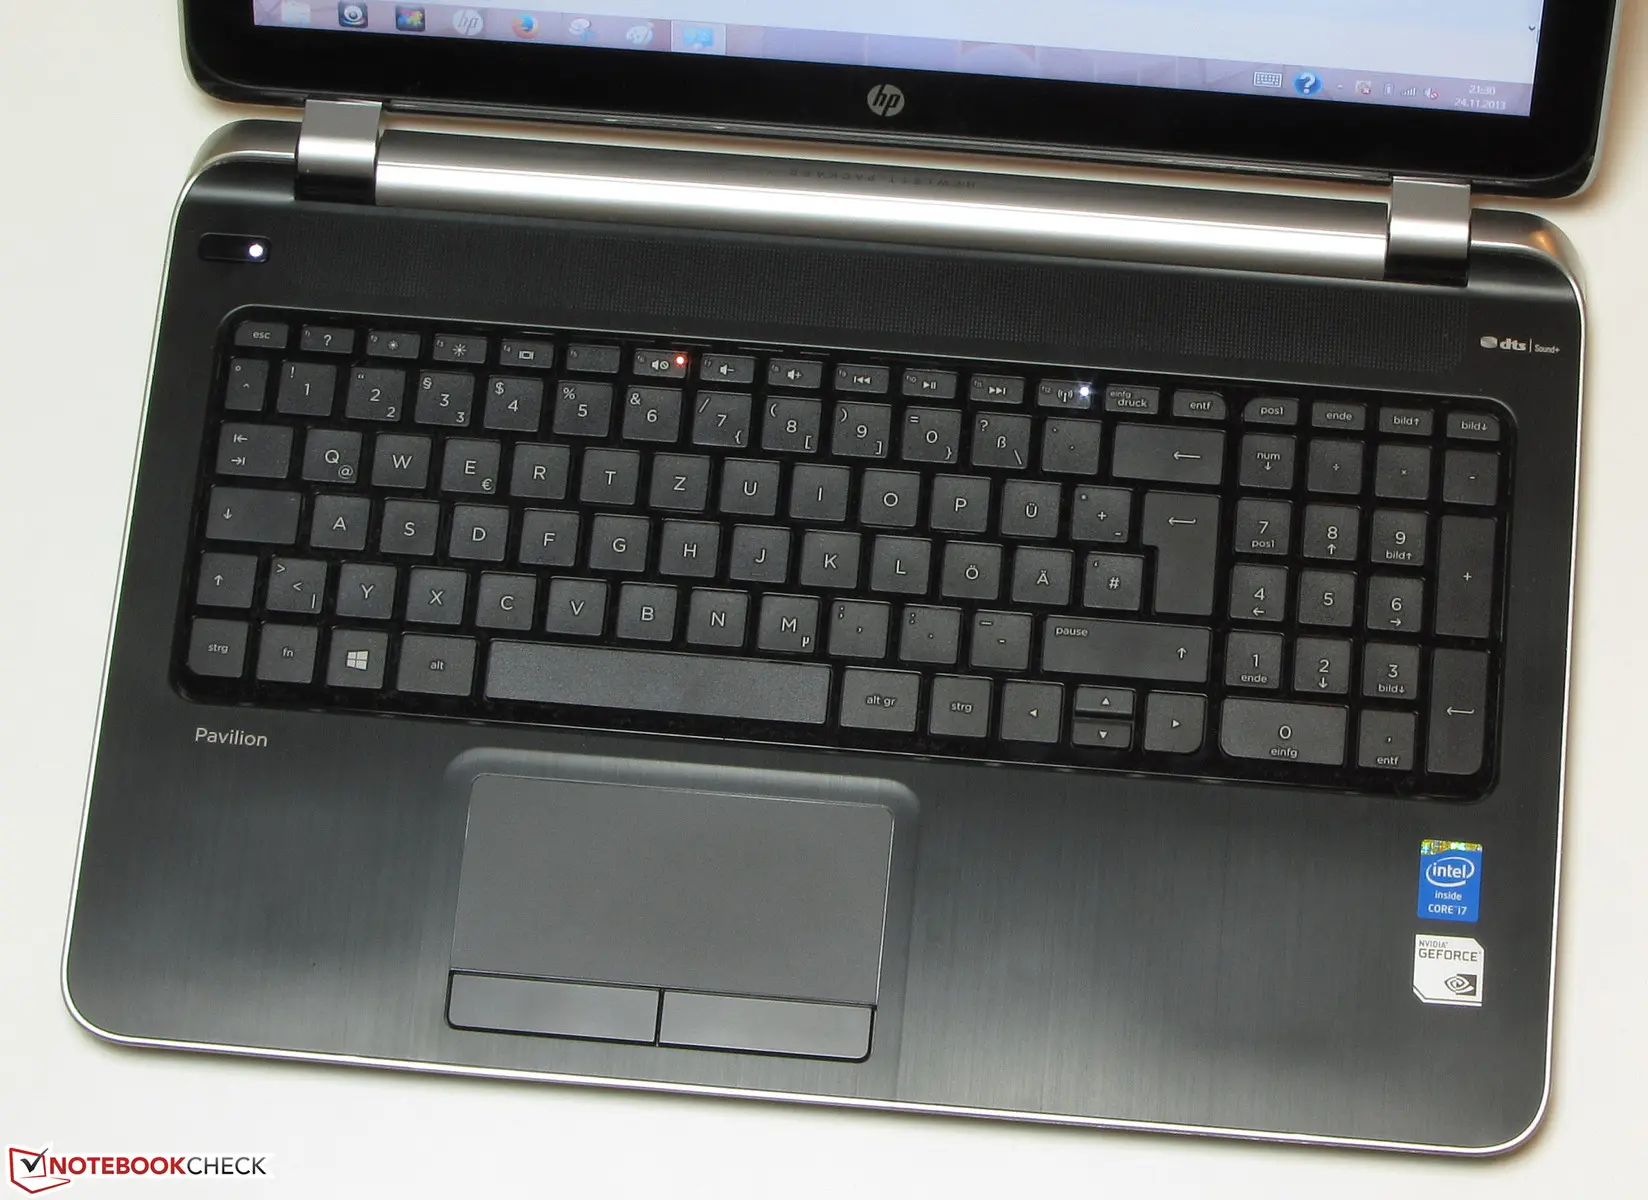 hewlett packard hp pavilion ts 15 notebook pc - What is the price of HP Pavilion TS 15 laptop